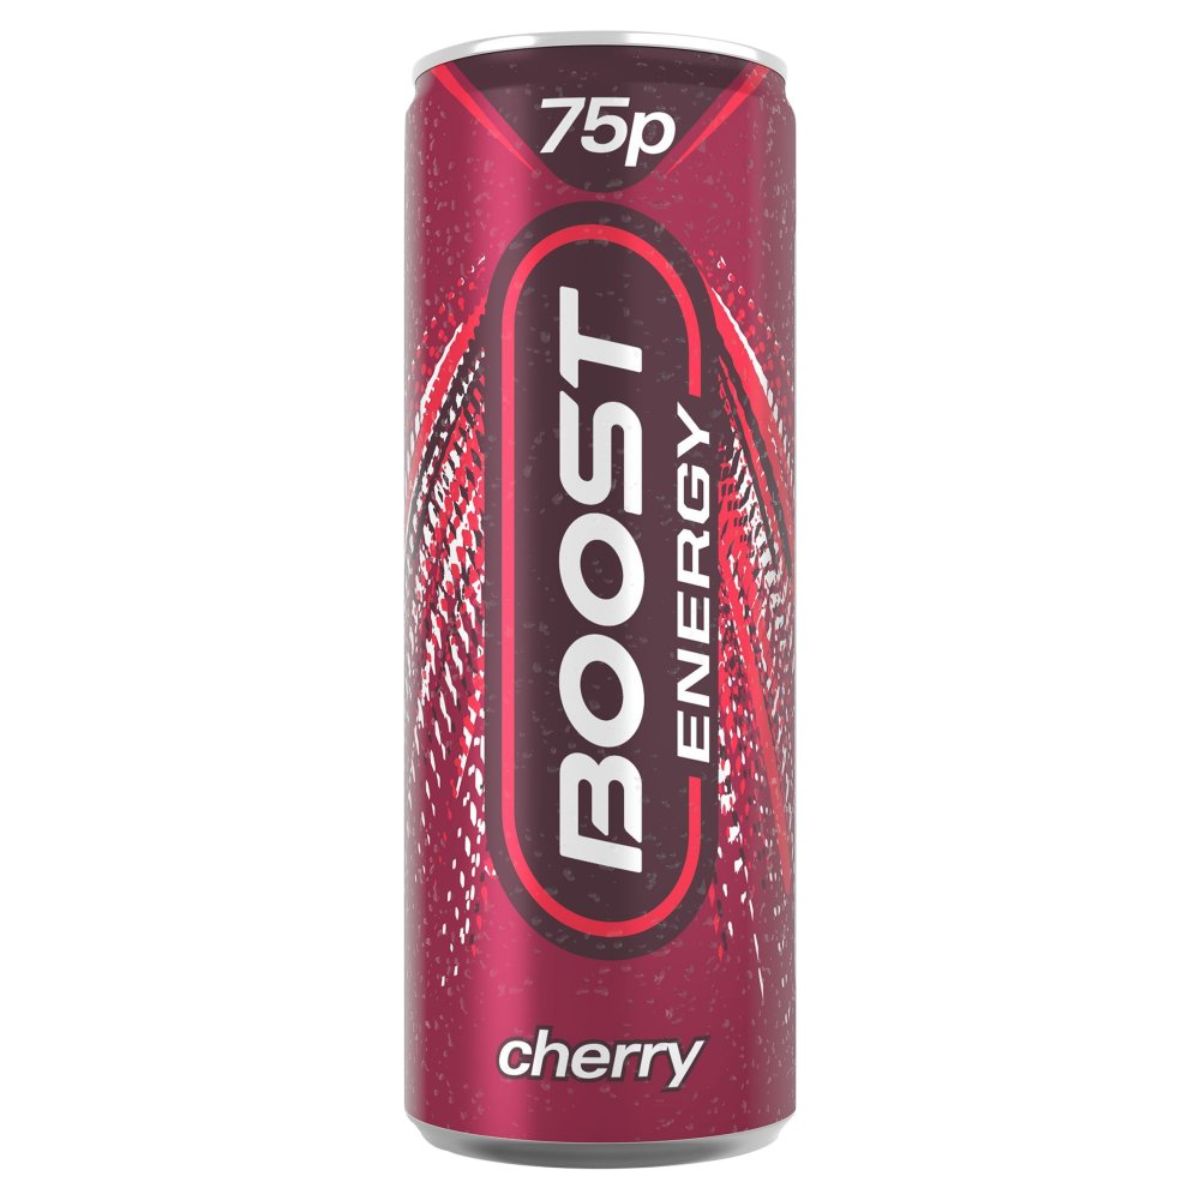 A can of Boost - Cherry Burst - 250ml on a white background.